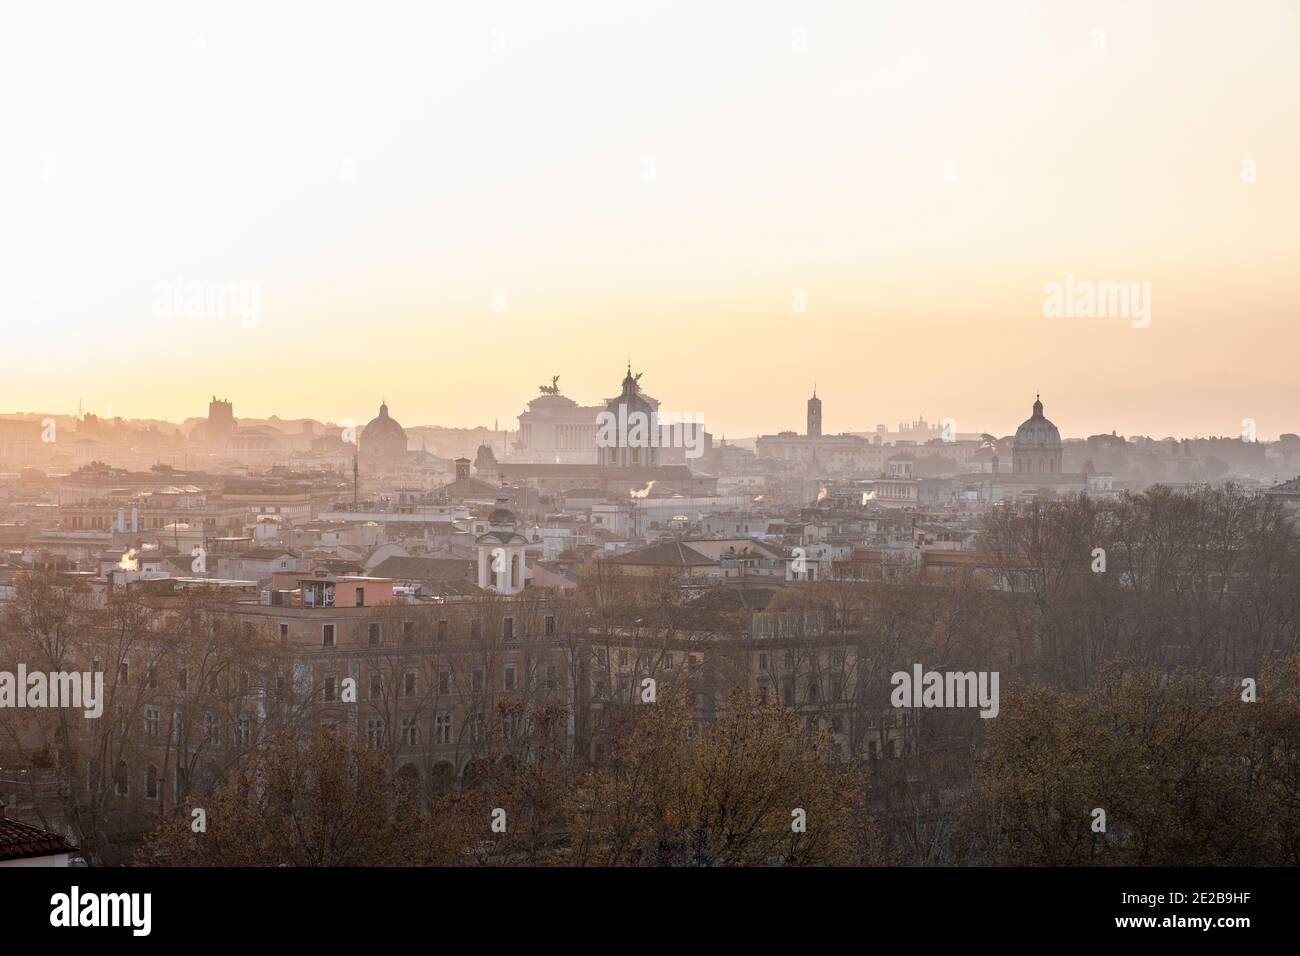 Skyline view of Rome, Italy, from Trastevere at sunrise. Famous landmarks include Vittorio Emanuele Monument and Church of Sant' Andrea della Valle Stock Photo